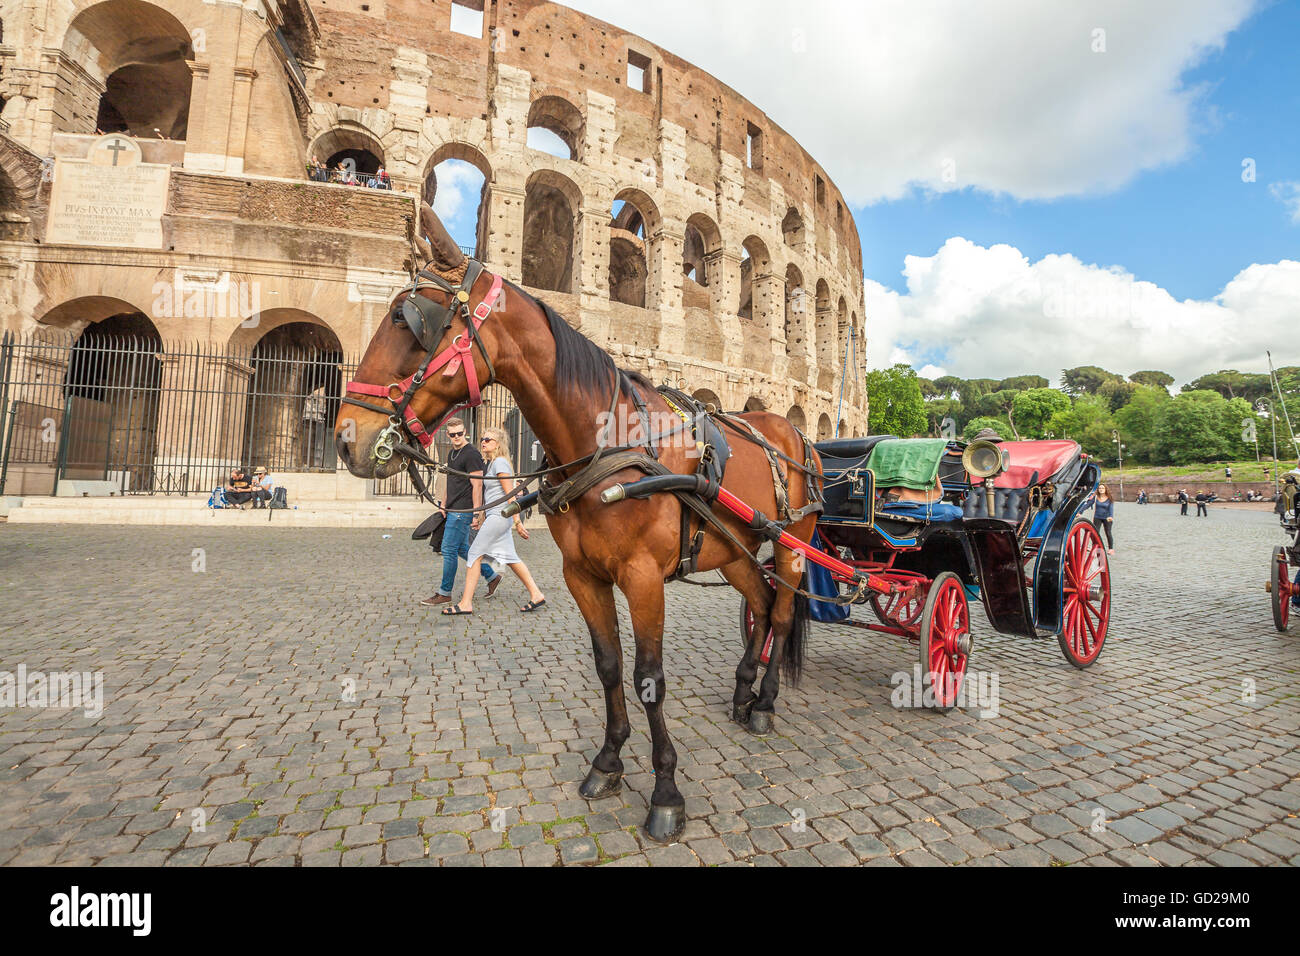 Horse carriage at Colosseo Stock Photo